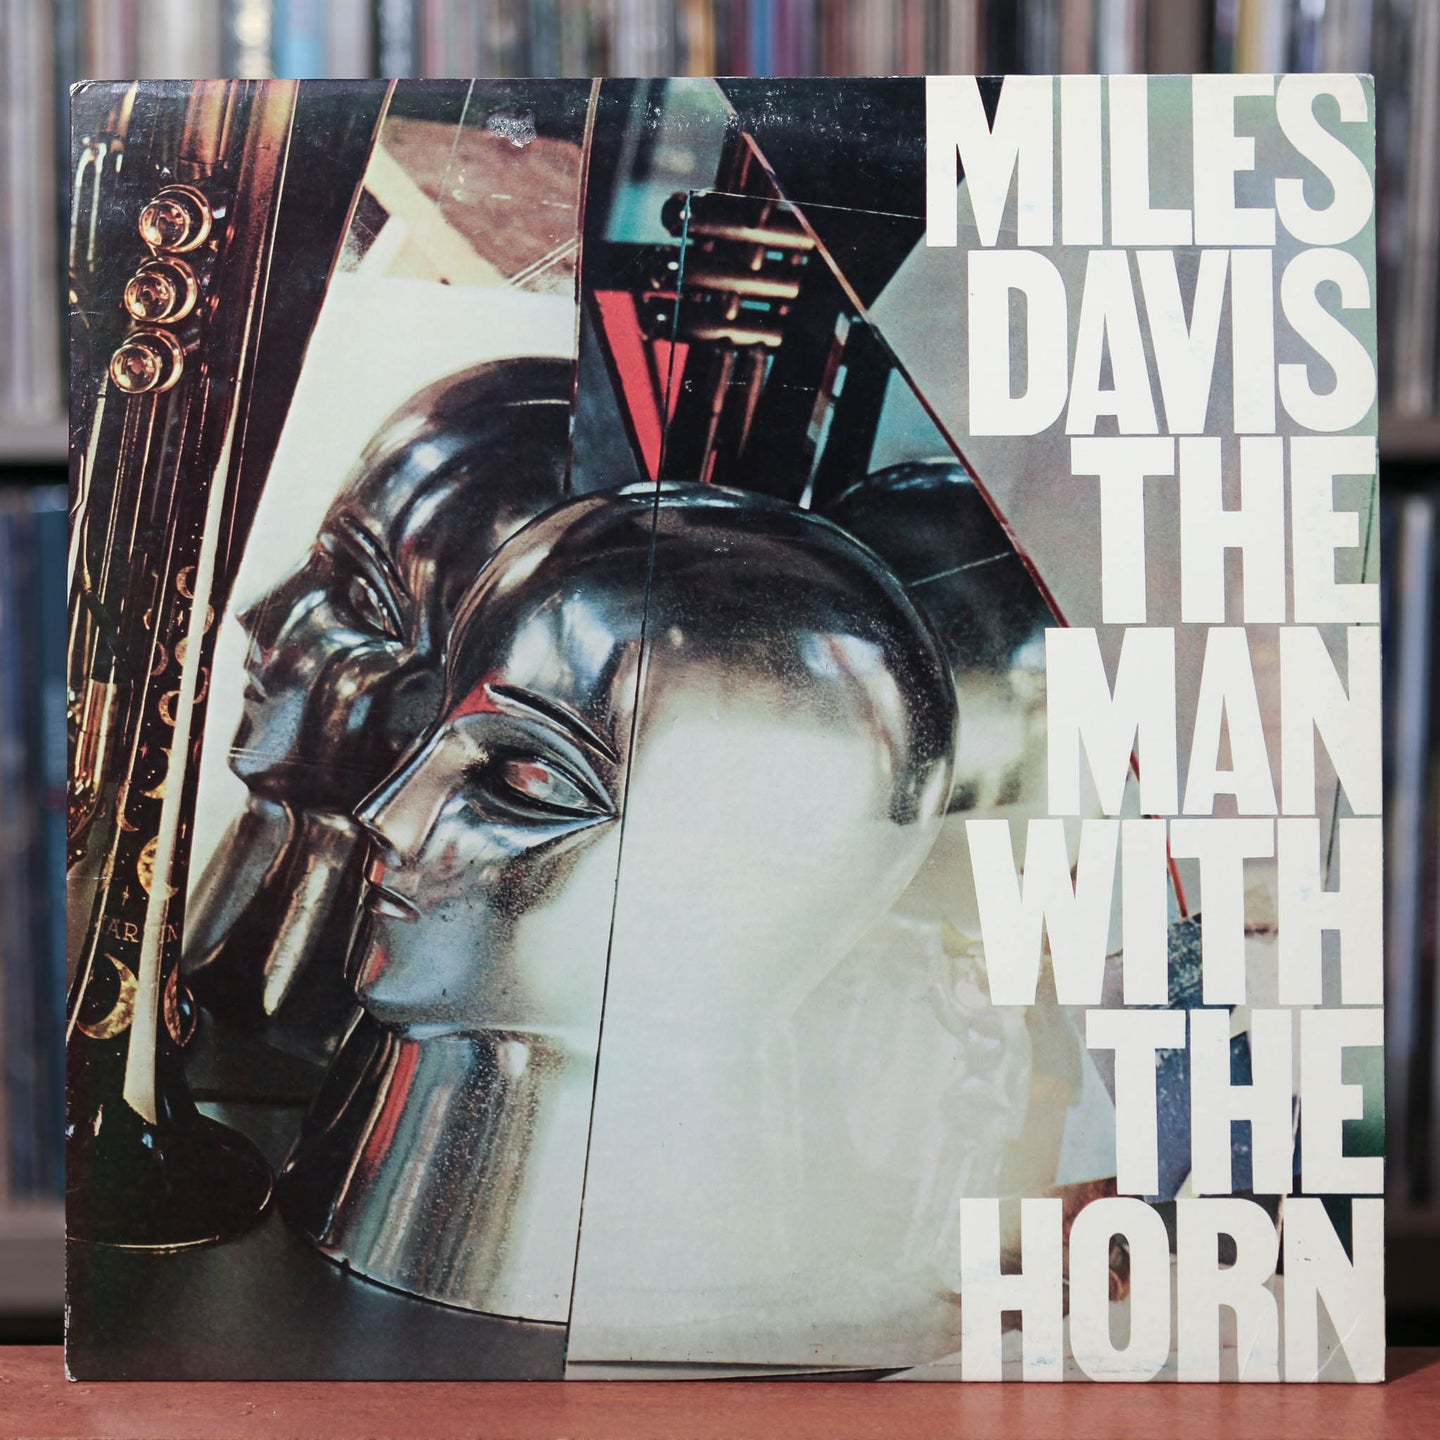 Miles Davis - The Man With The Horn - 1981 Columbia, VG+/VG+